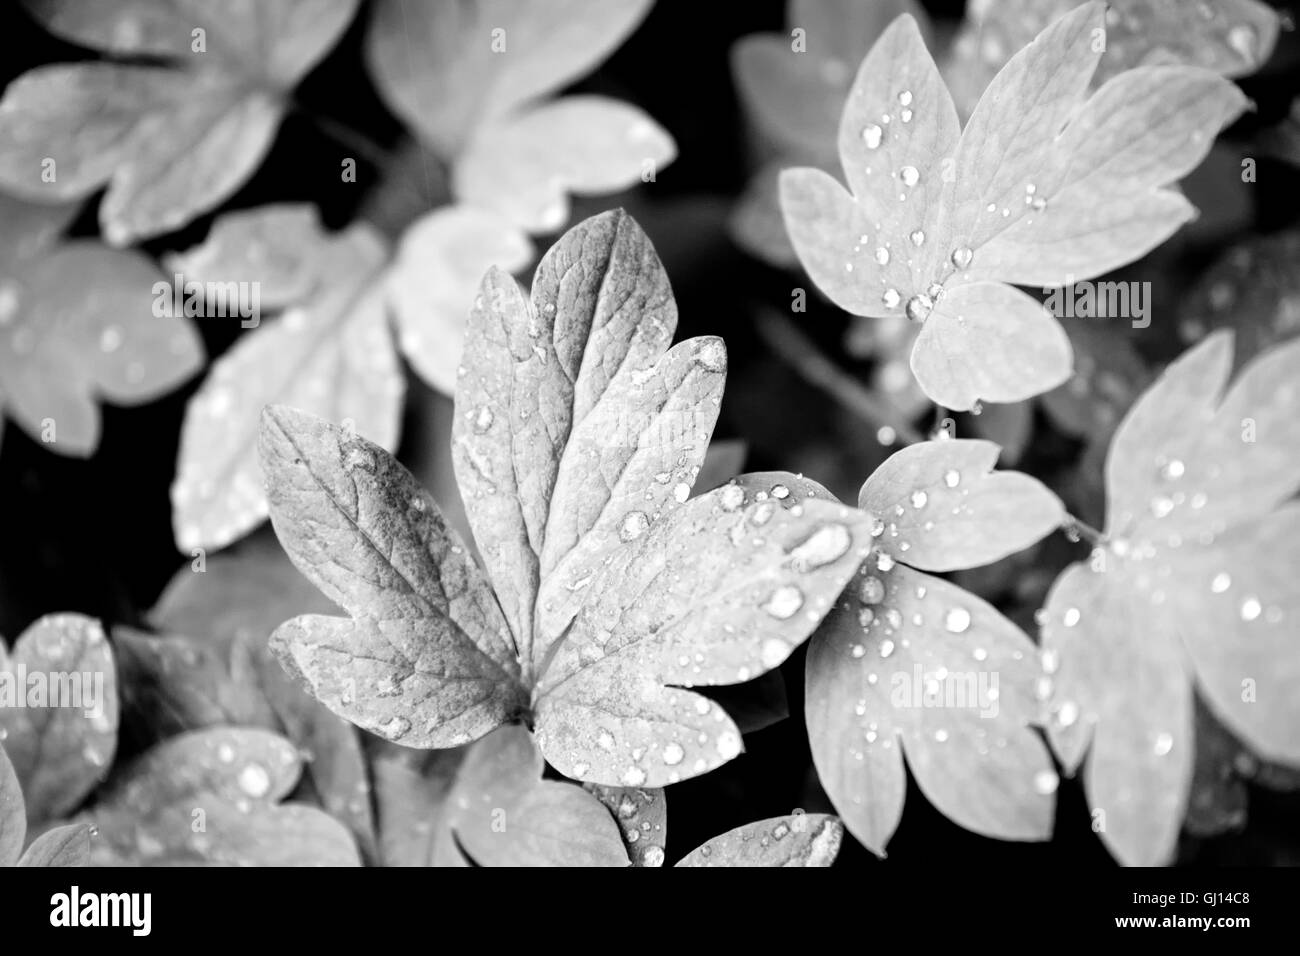 Black and white leaves nature close up Stock Photo